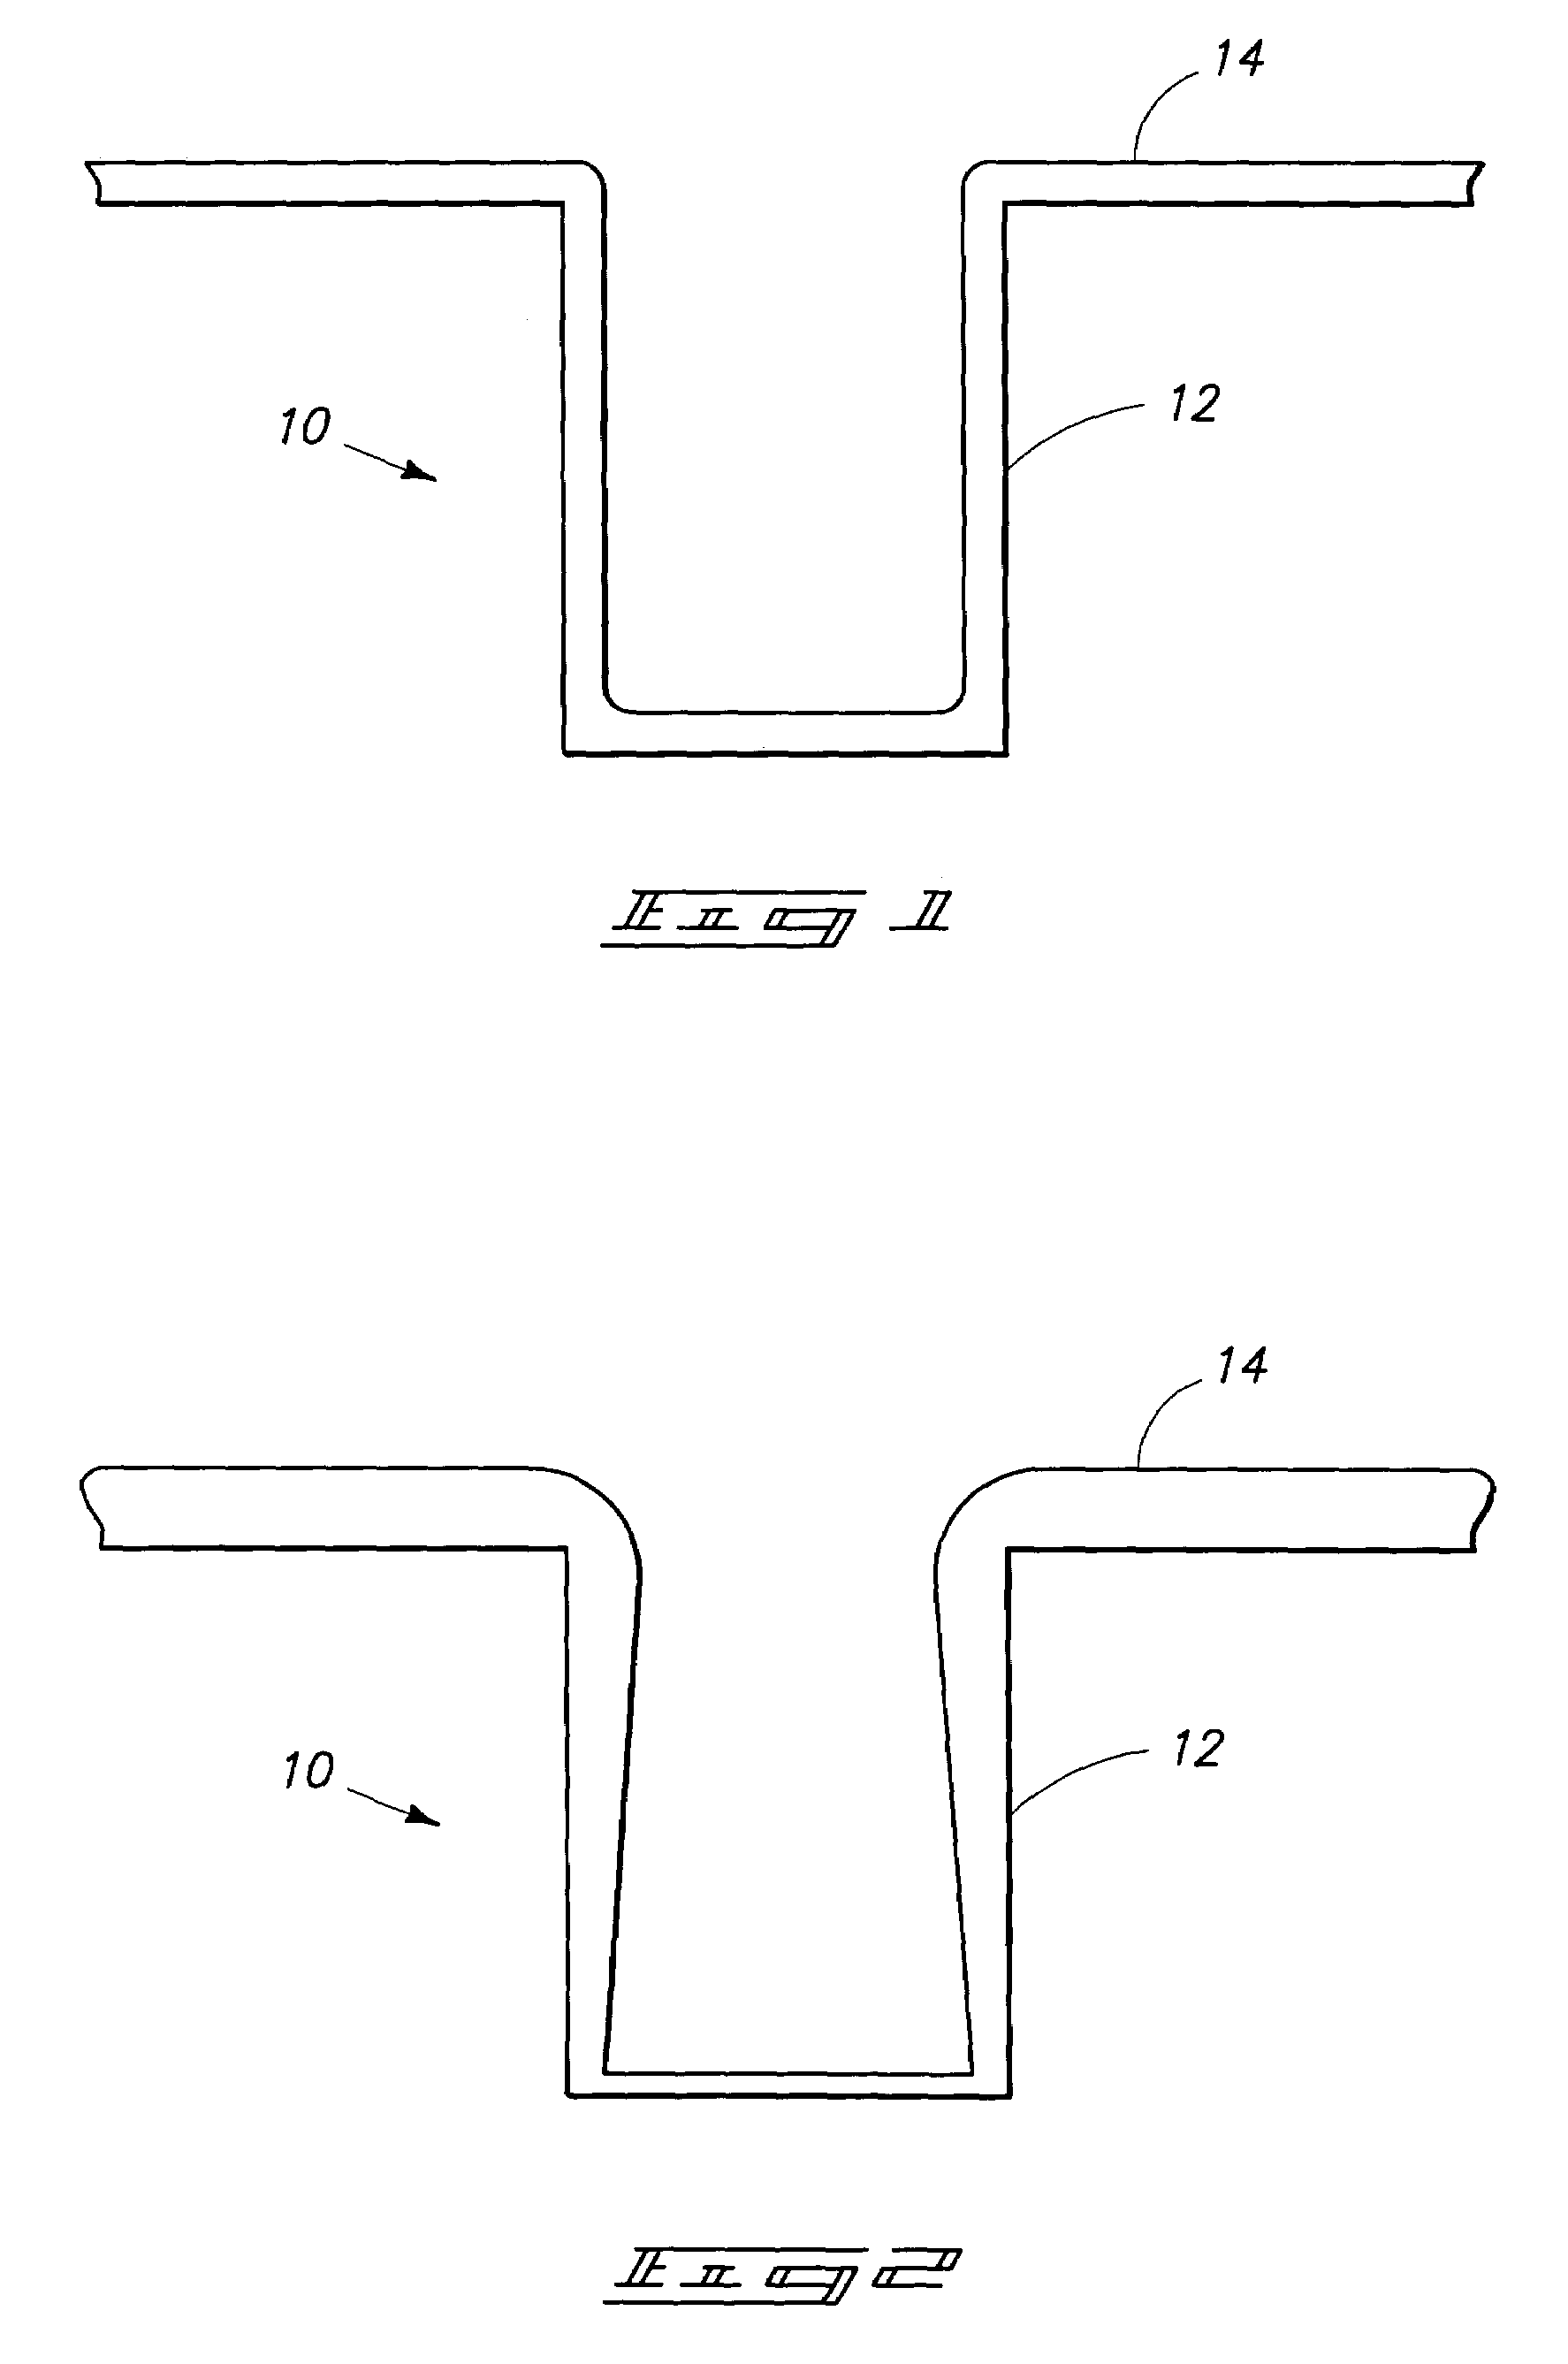 Semiconductor processing methods of chemical vapor depositing SiO2 on a substrate